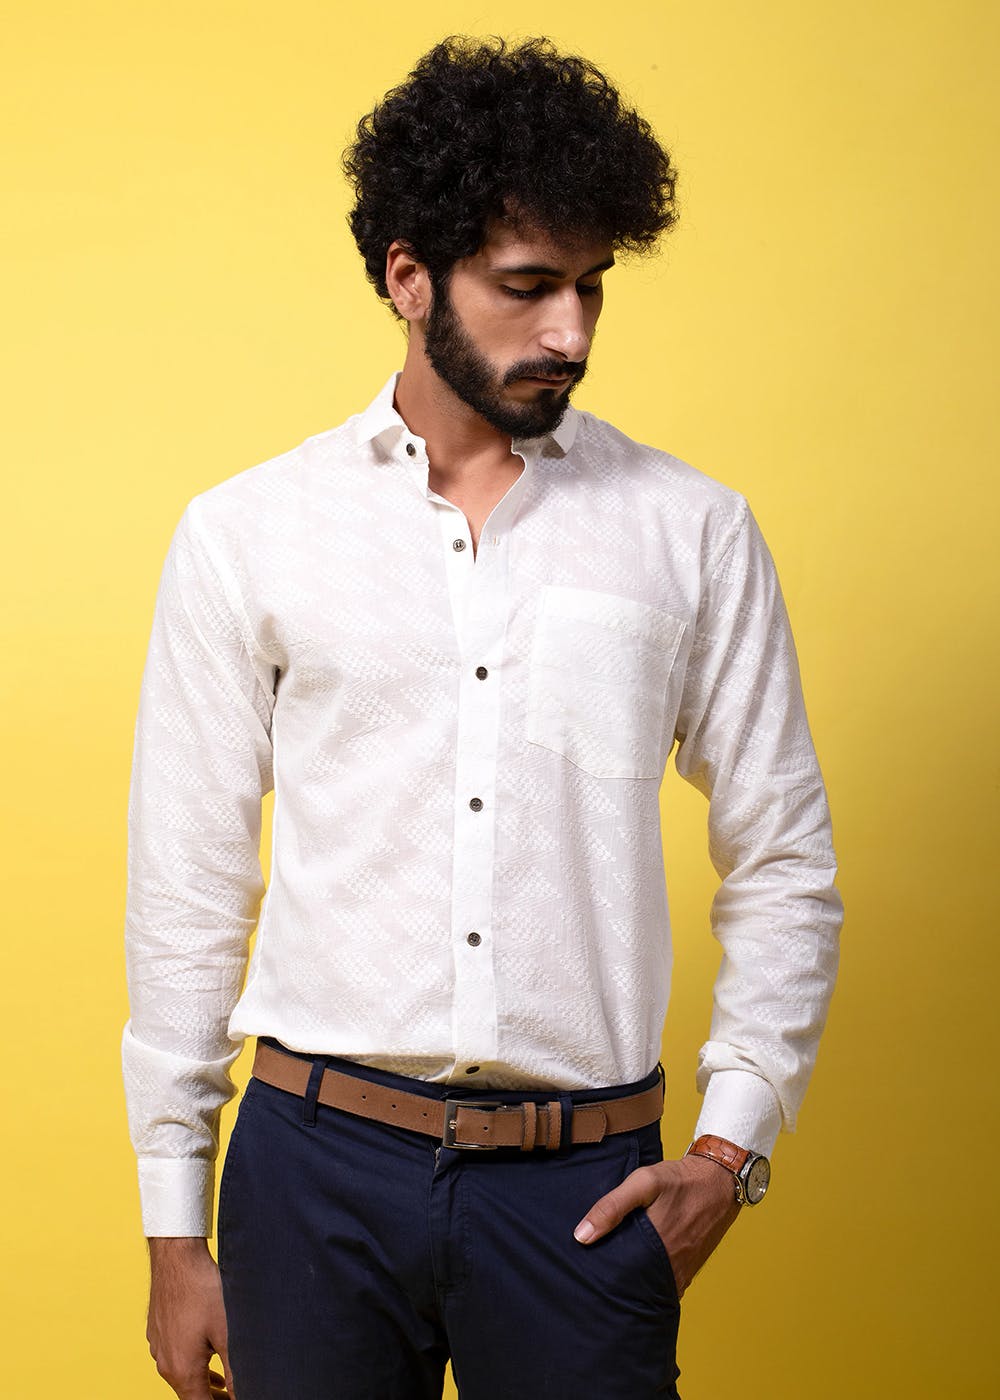 Get Contrast Button Detail Self Designed White Shirt at ₹ 2850 ...